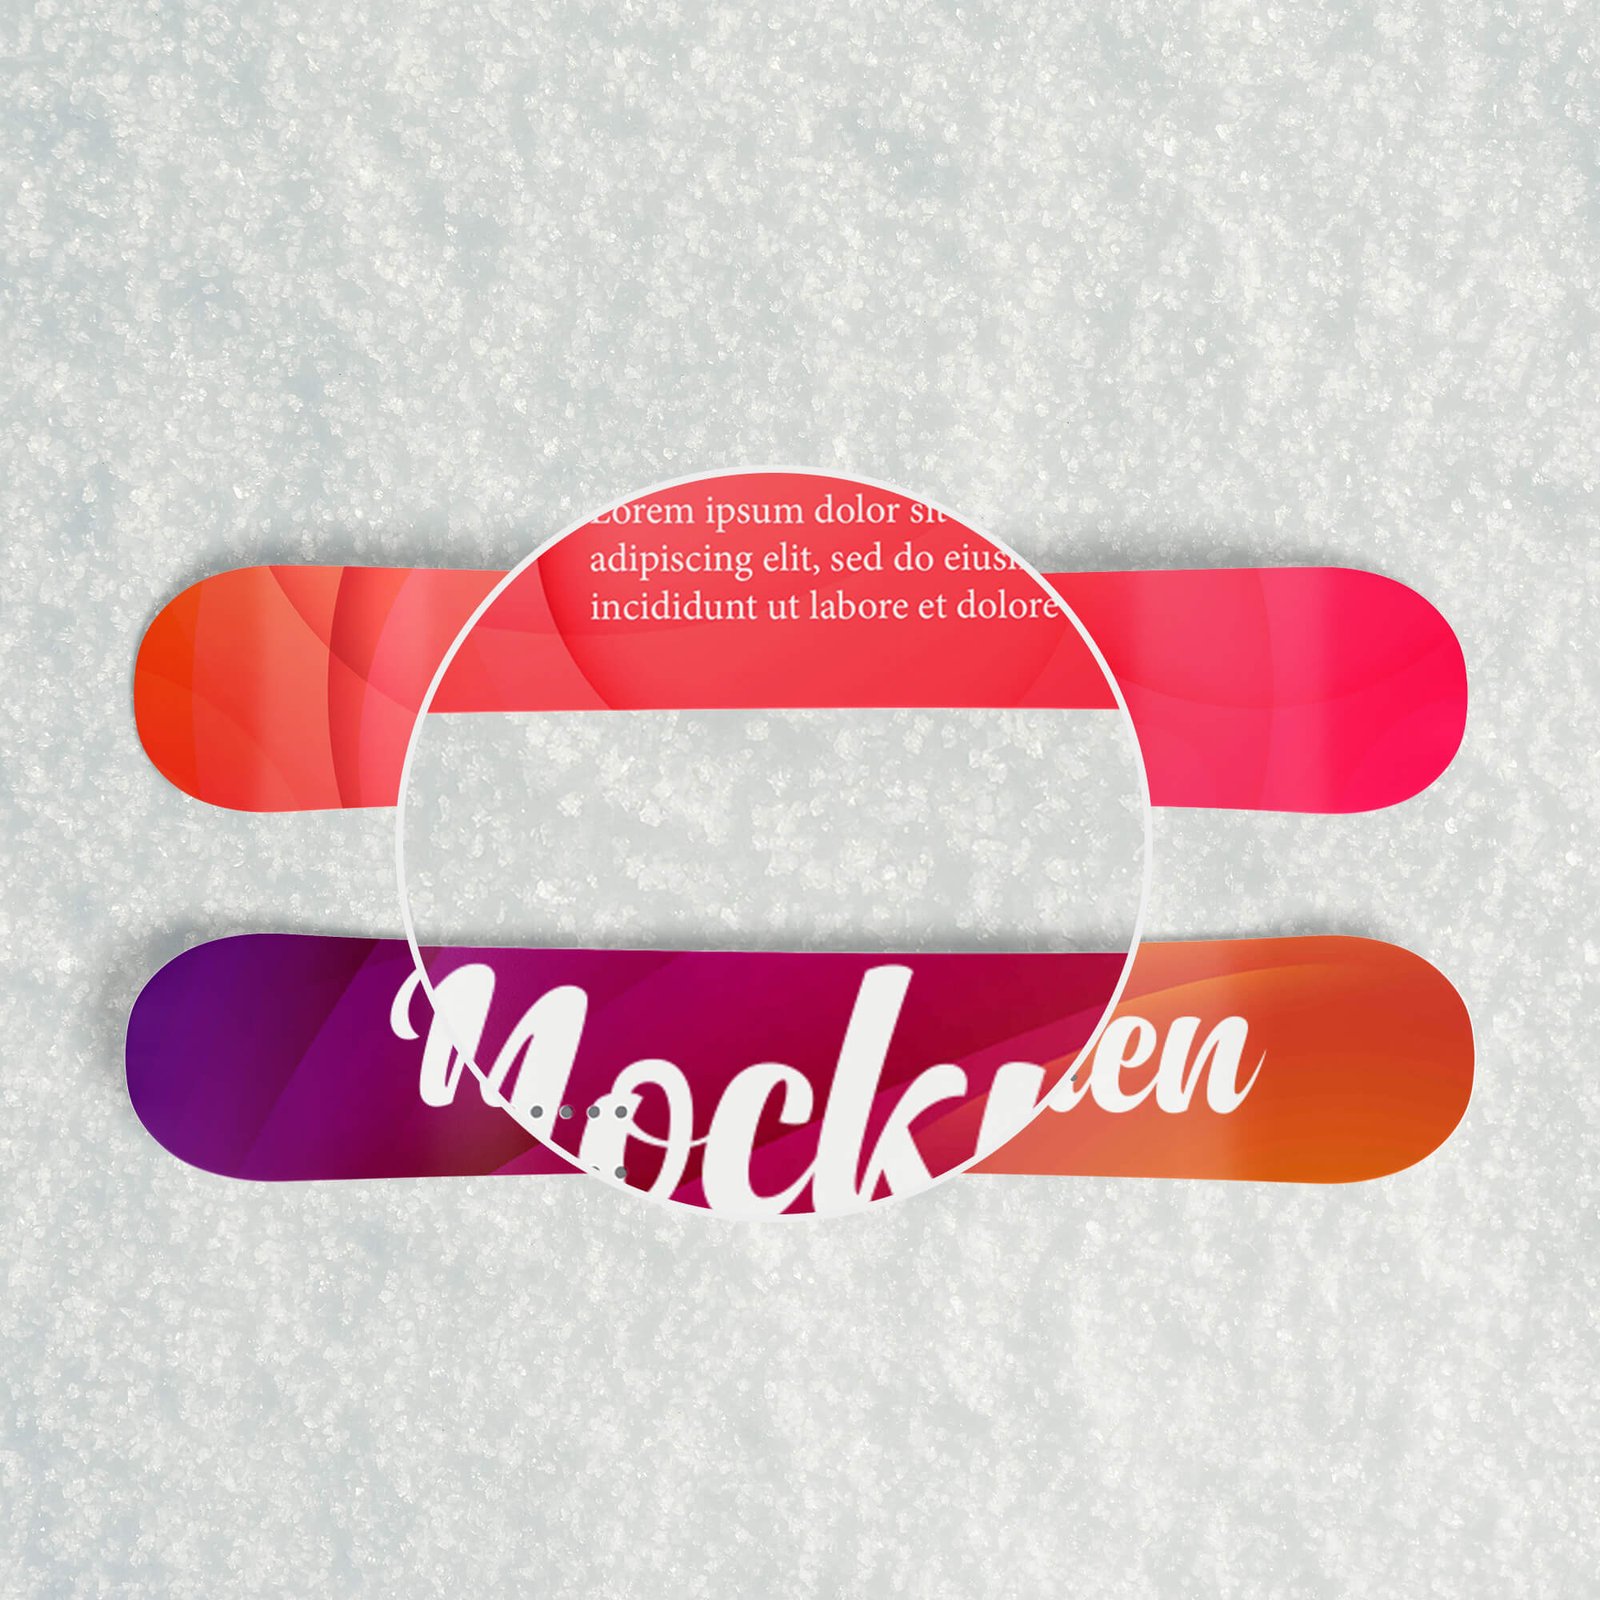 Close Up Of a Free Snowboard Mockup PSD Template